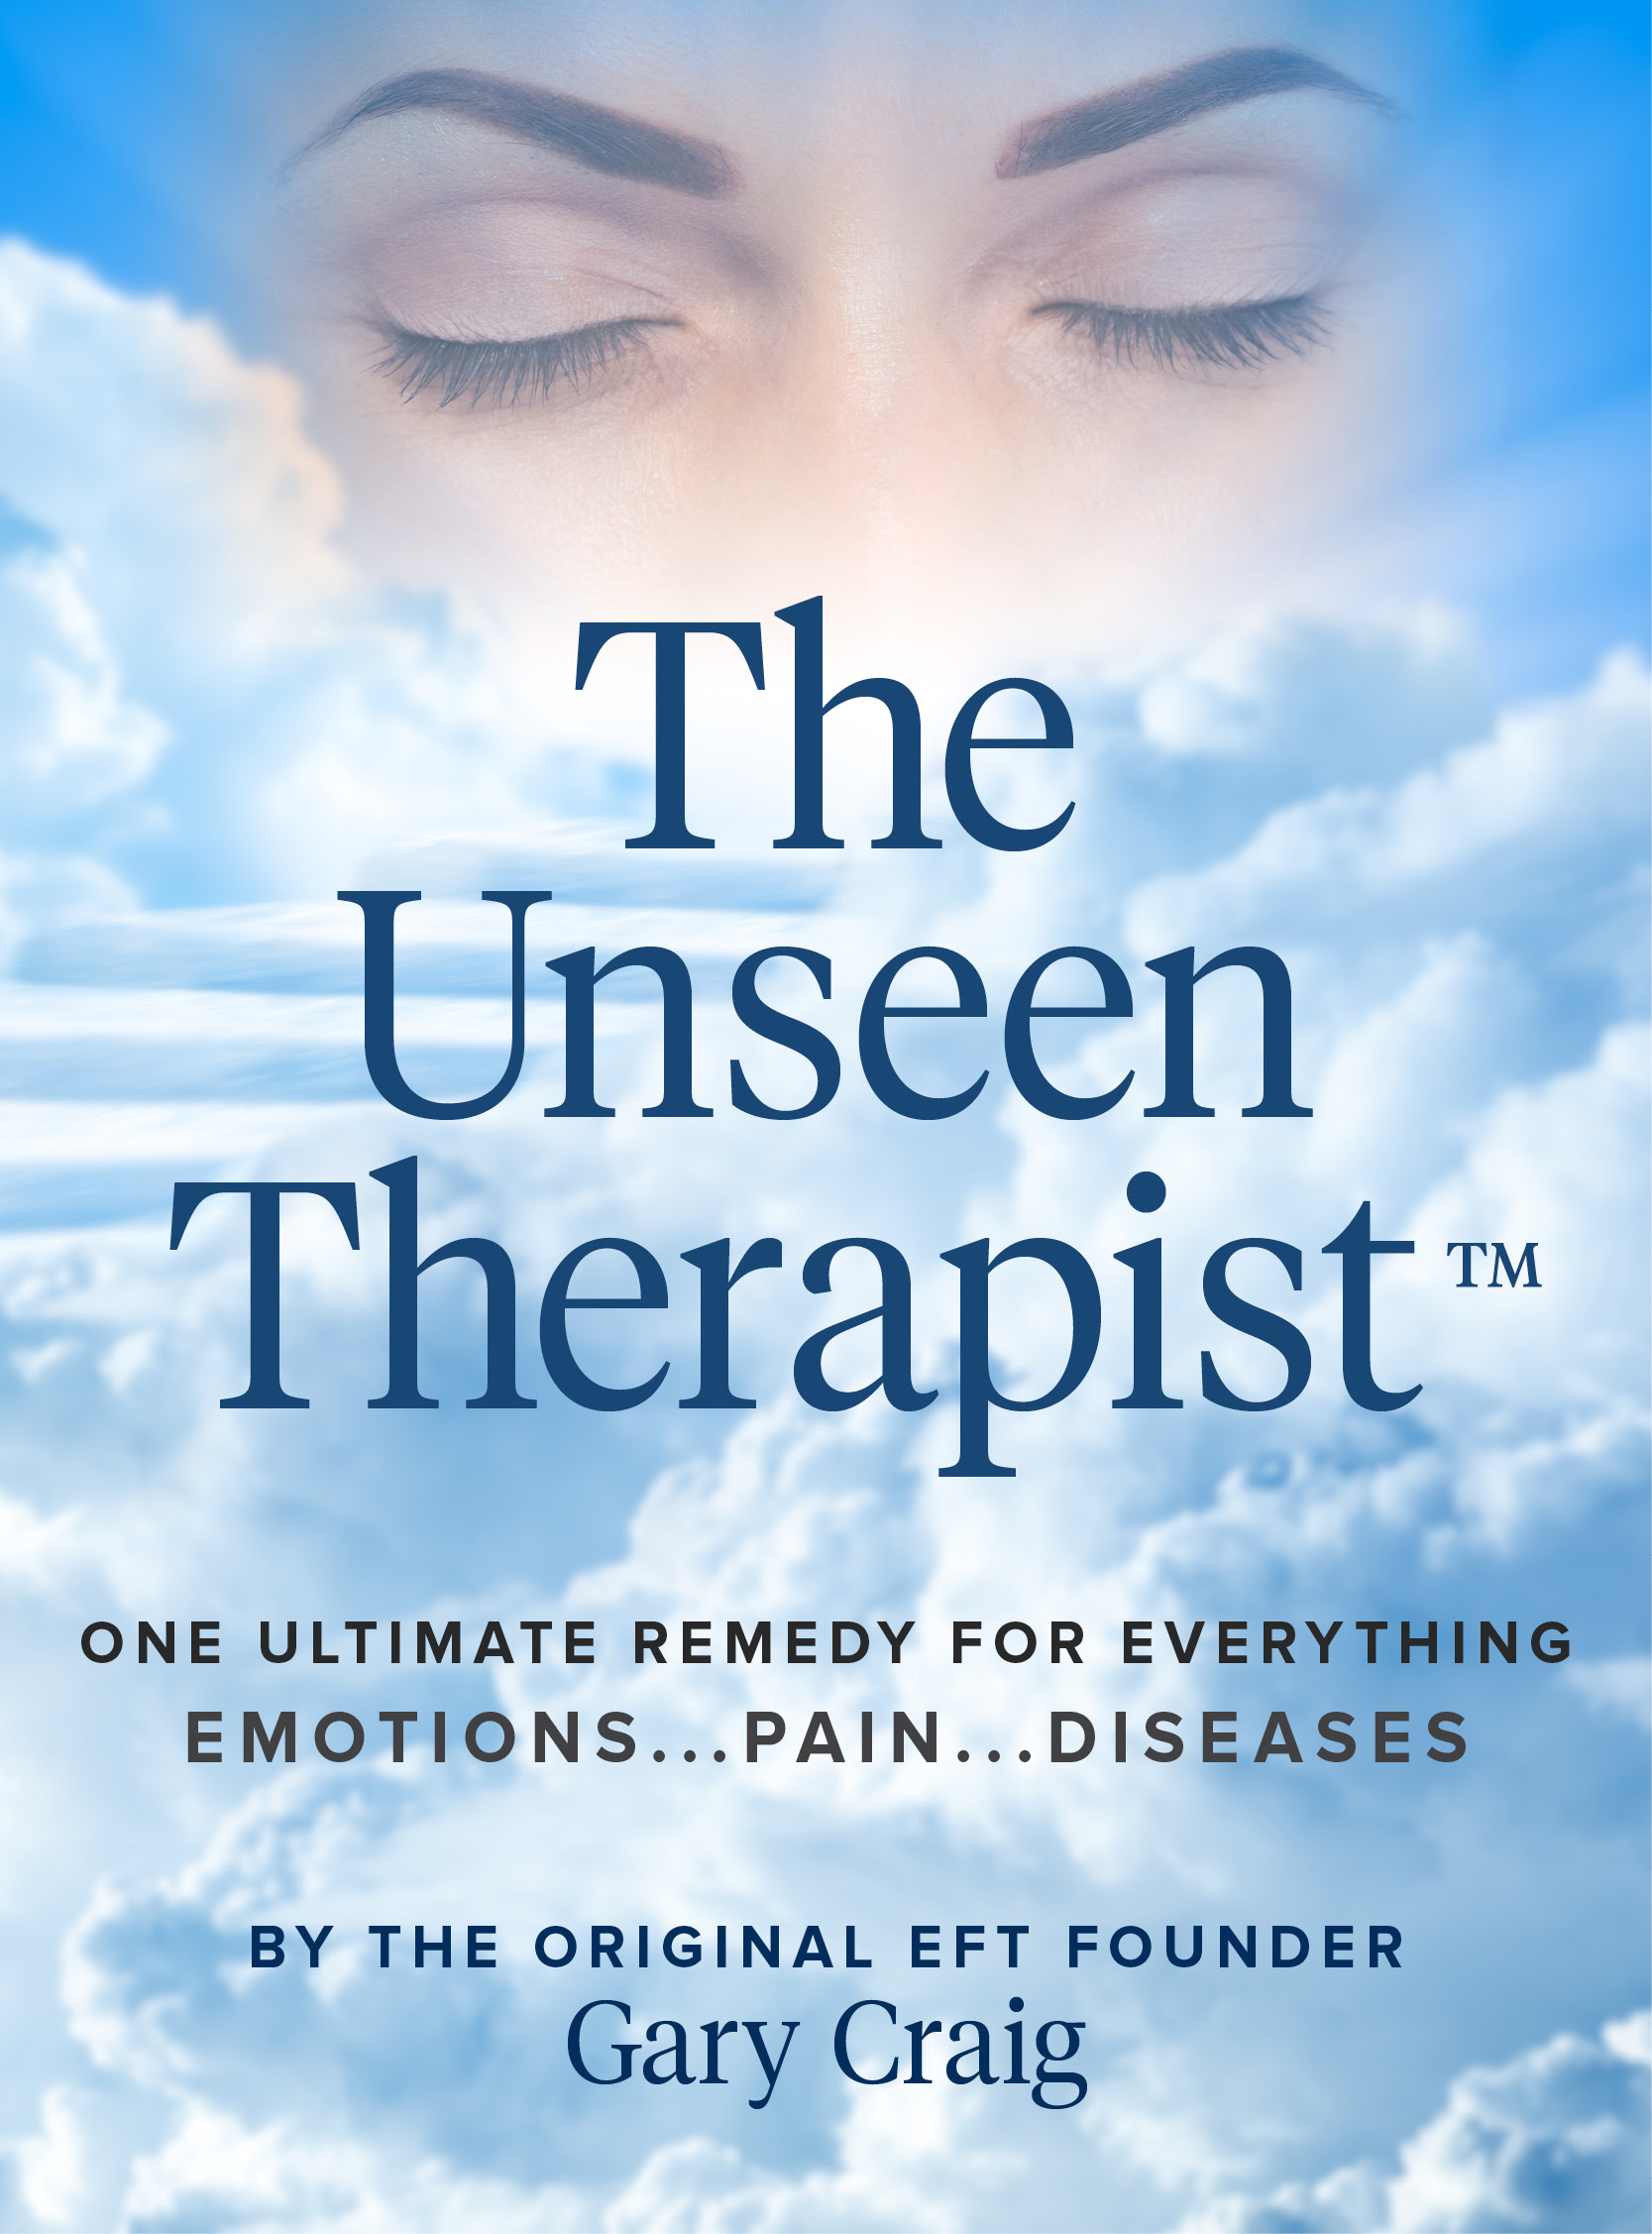 Unseen Therapist book title